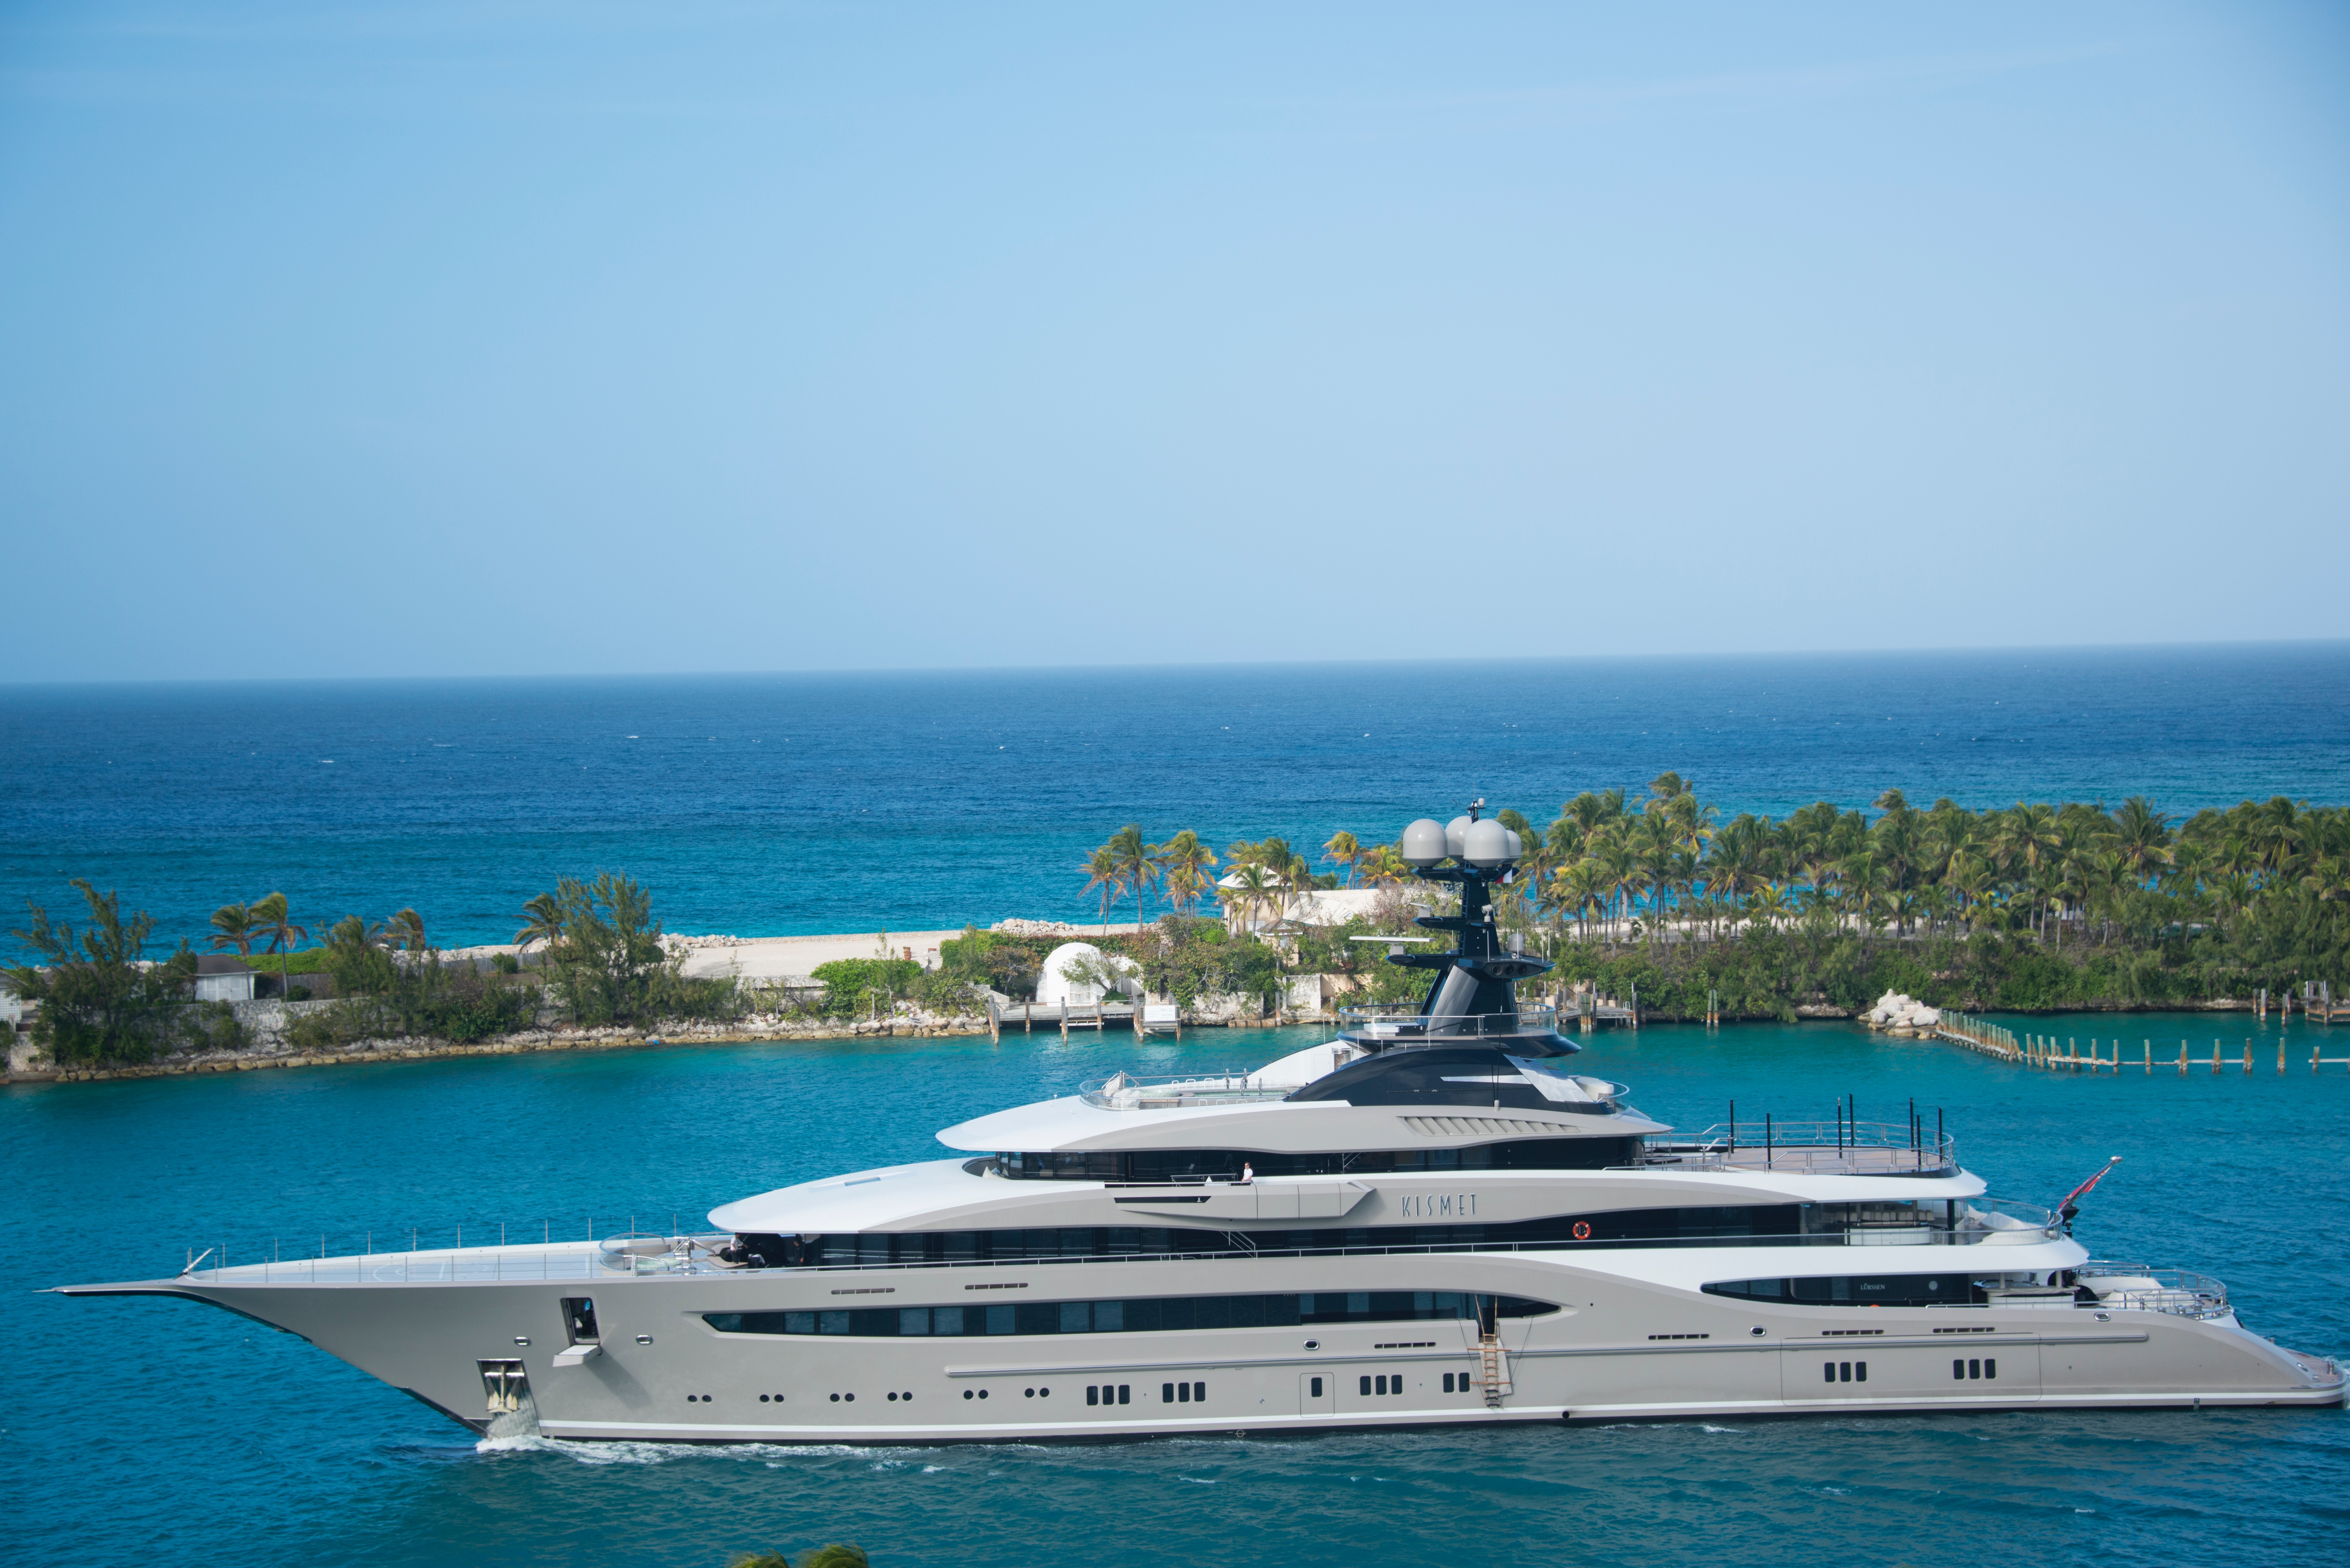 Not so smooth sailing: The problems with owning a superyacht